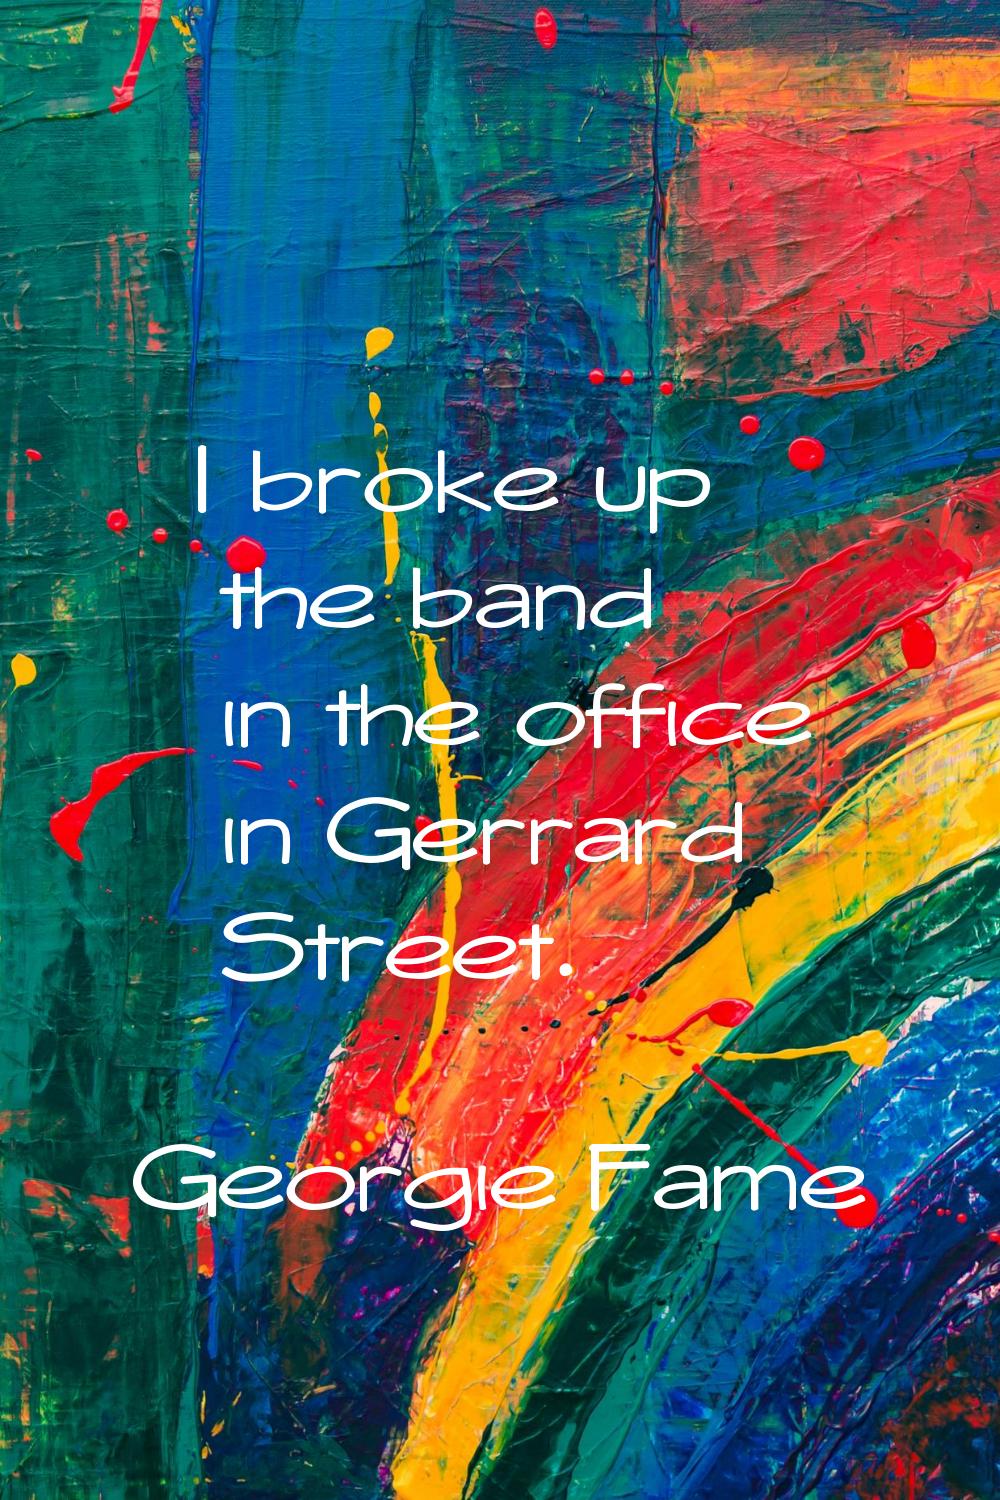 I broke up the band in the office in Gerrard Street.